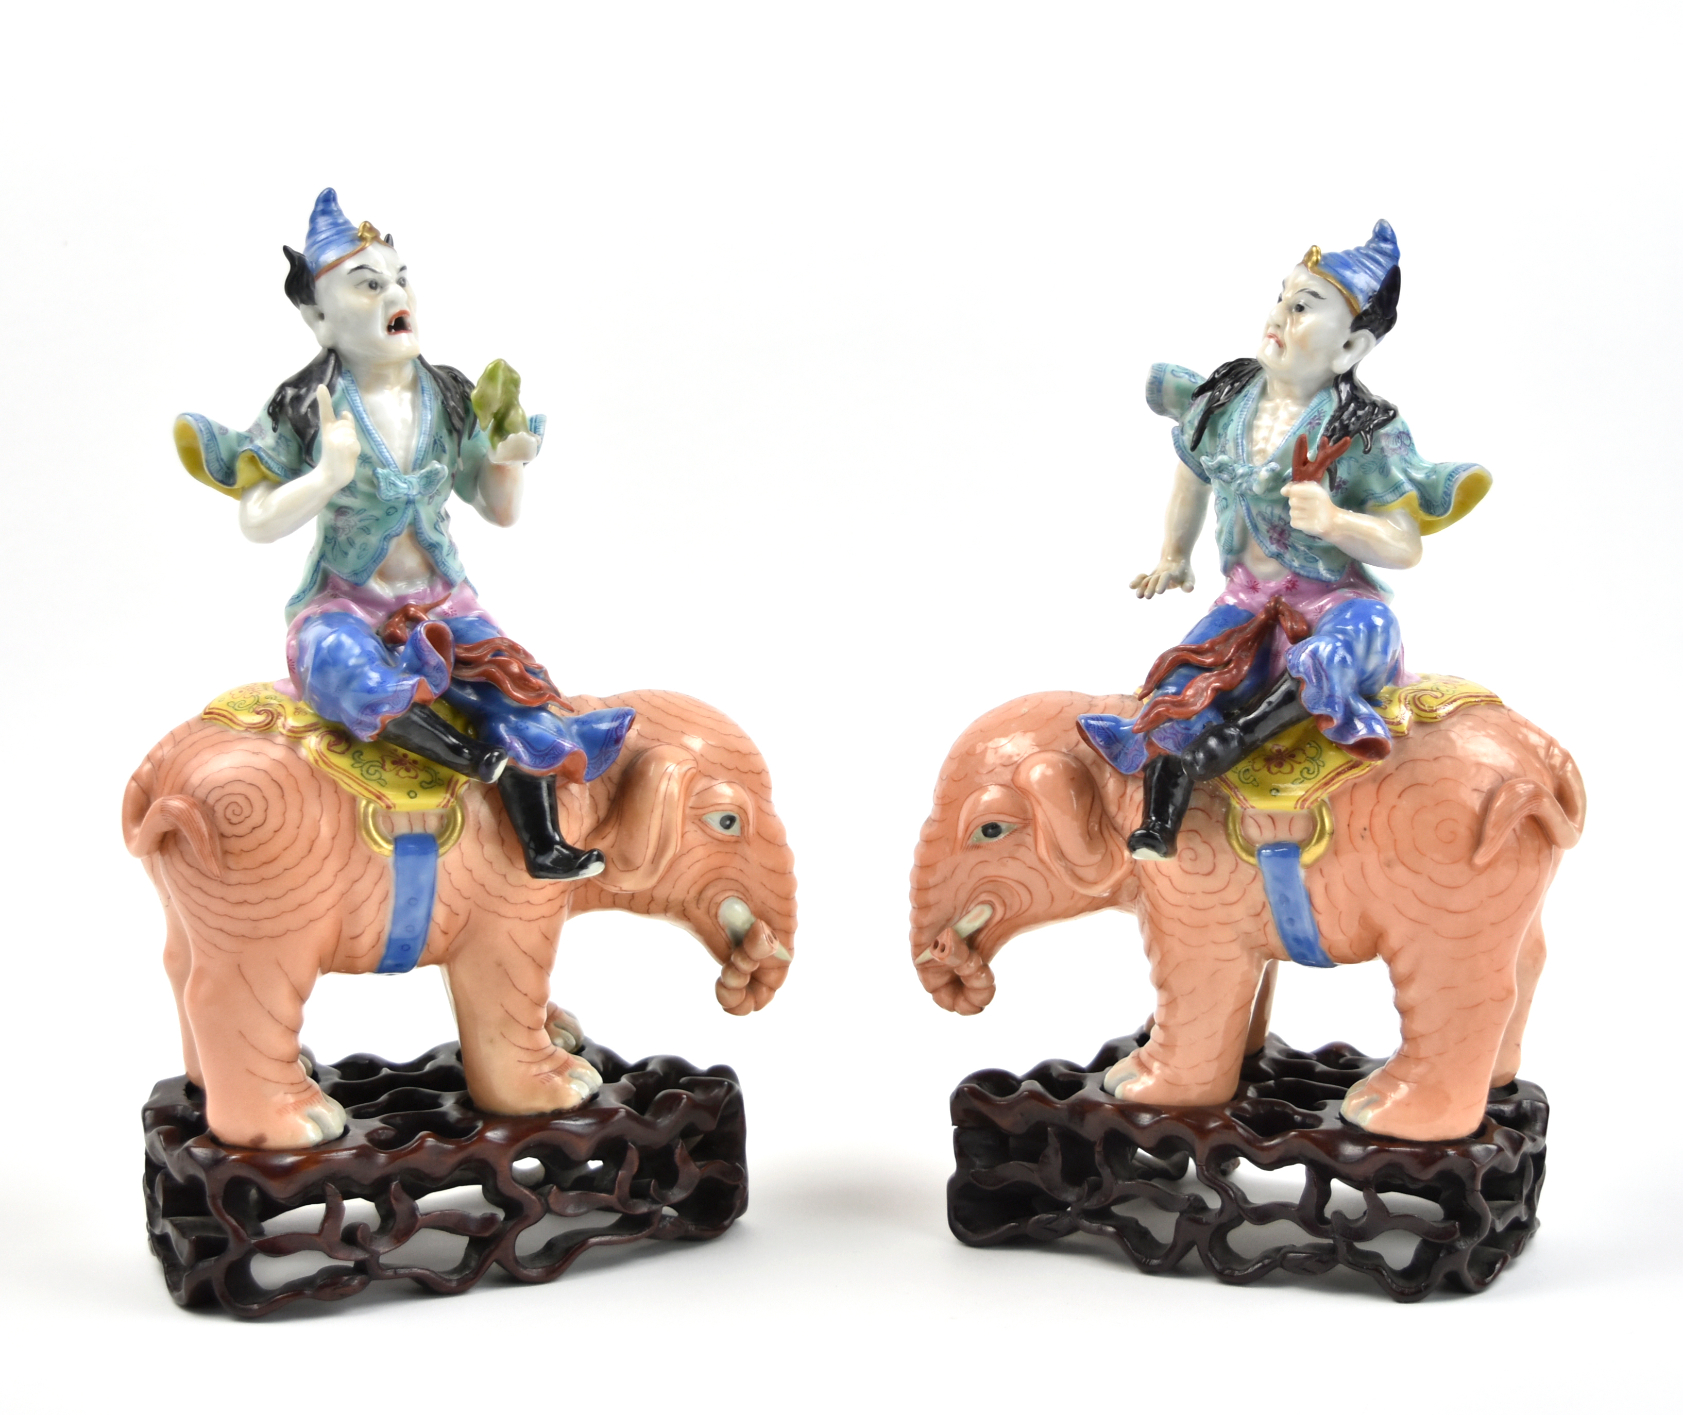 PAIR OF CHINESE FIGURES ON ELEPHANT 18TH 3396bb